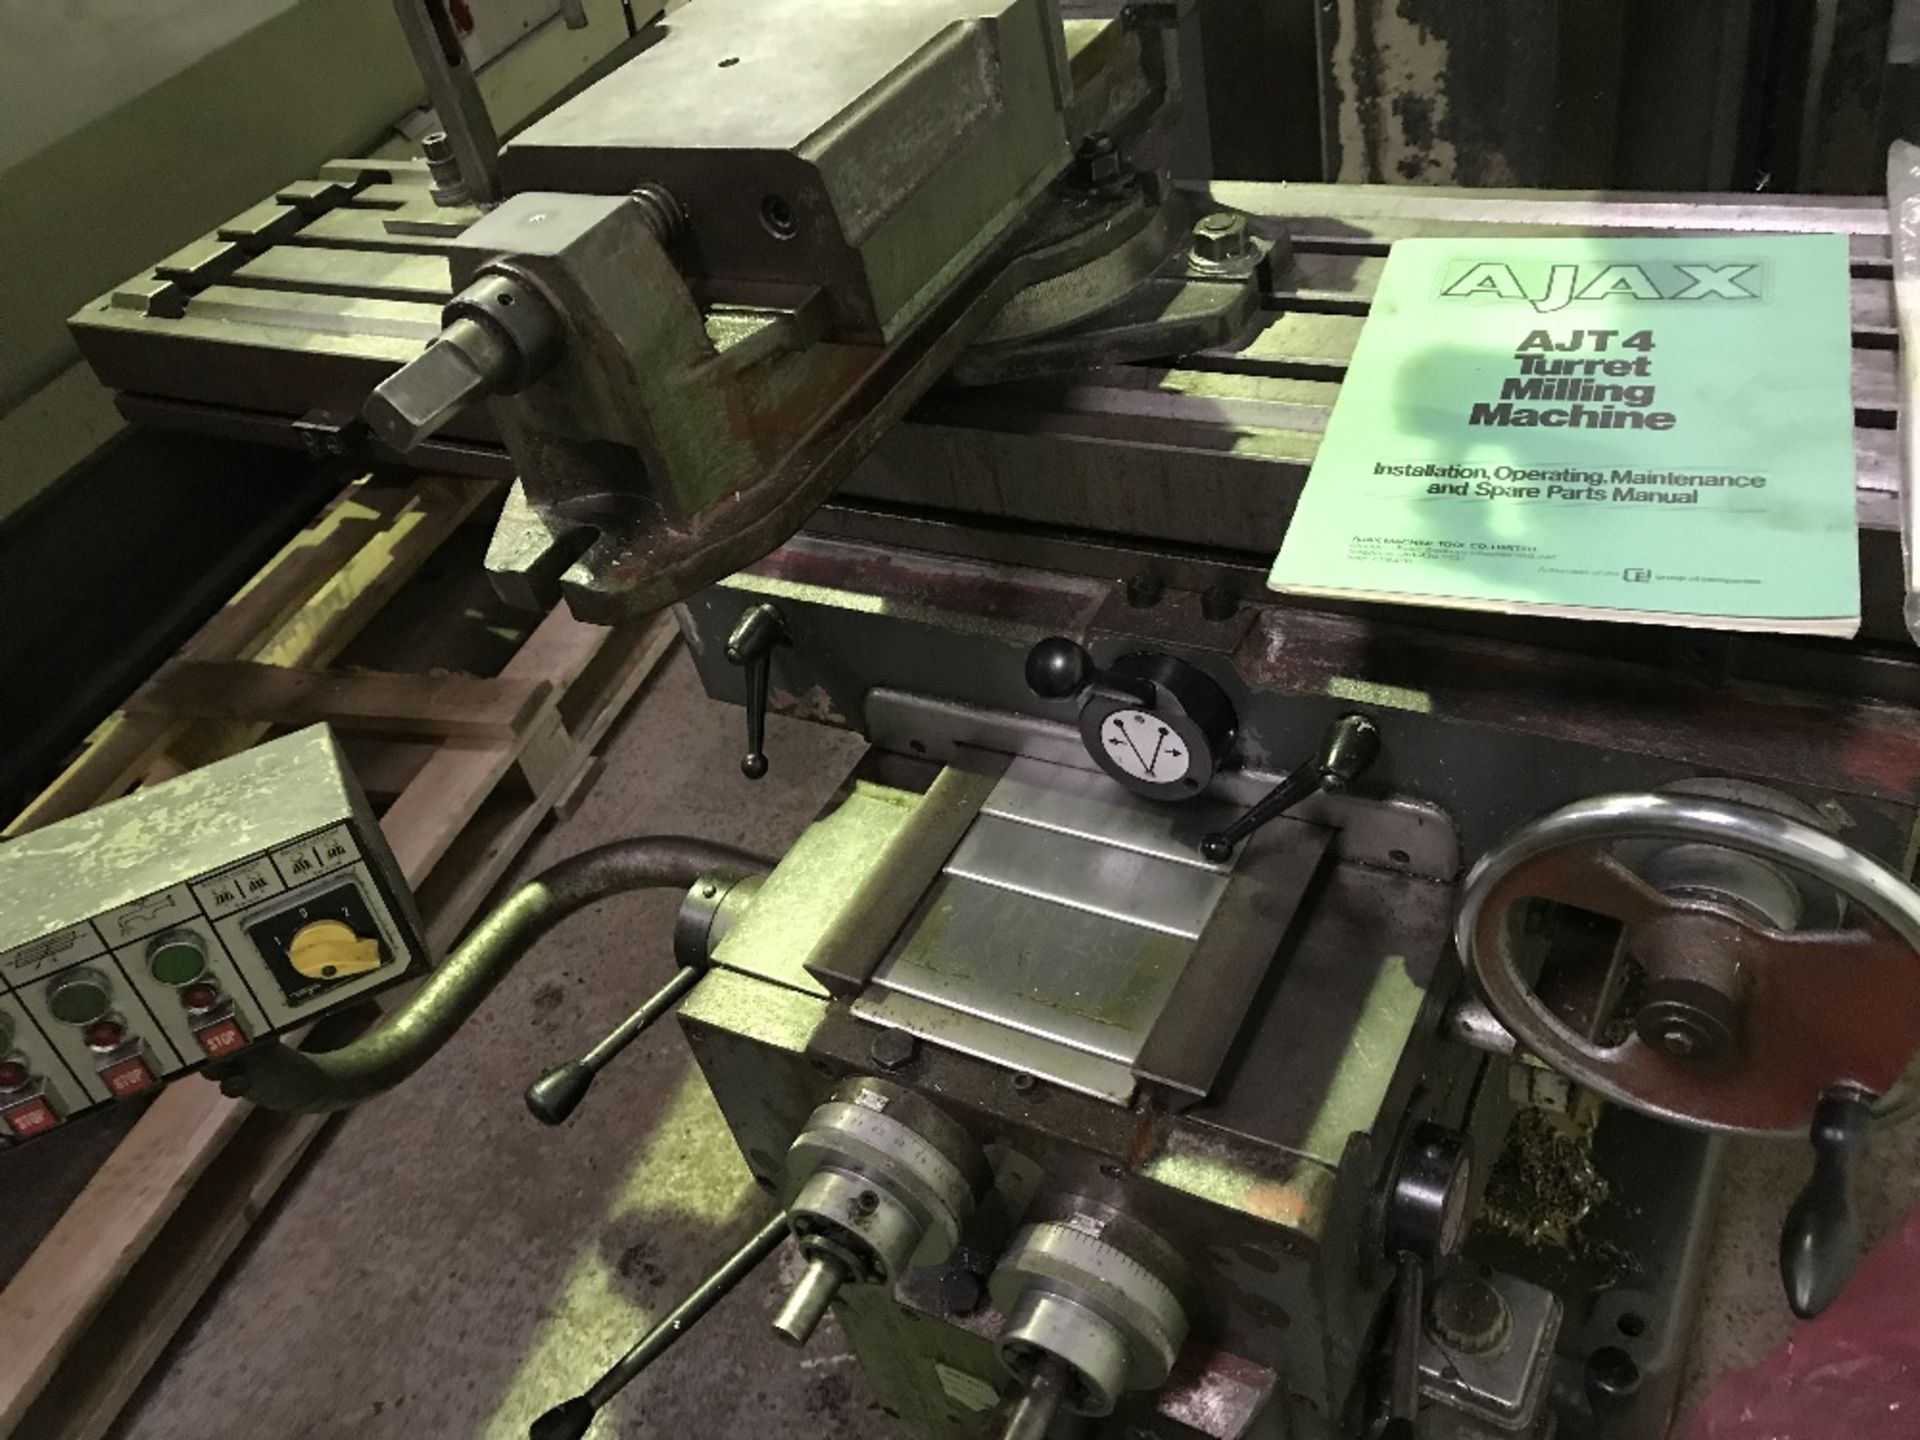 AJAX TURRET MILLING MACHINE WITH HEIDENHAIN XYZ CONTROL UNIT SN: 30438B46252 Sourced directly from a - Image 6 of 9